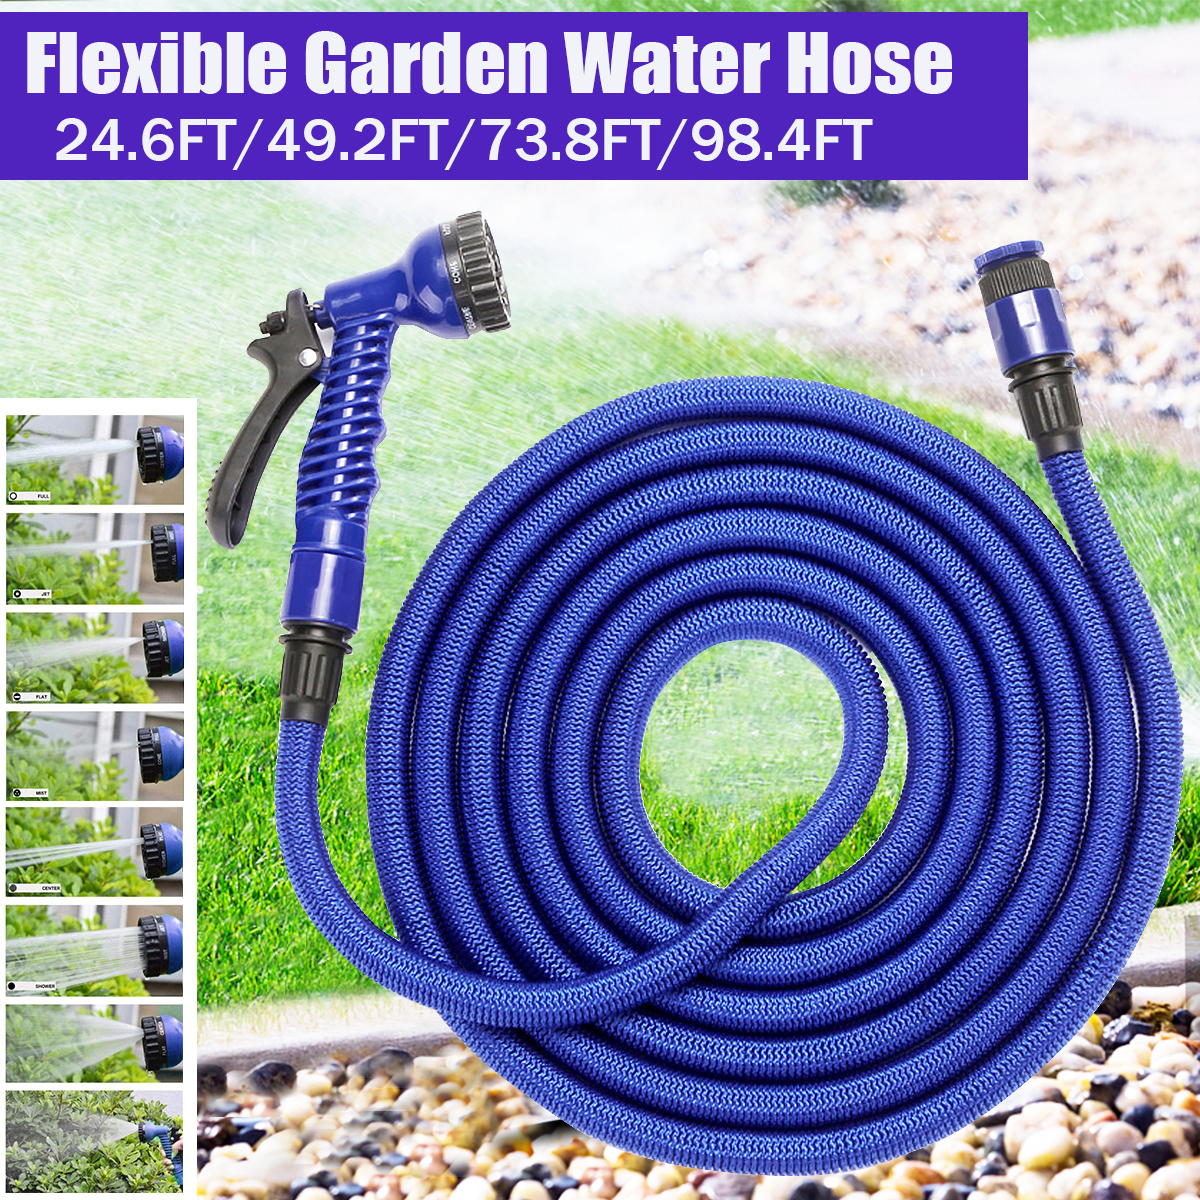 25-100ft-Expandable-Flexible-Garden-Water-Hose-Water-Pipe-Watering-Sprayer-1807508-1